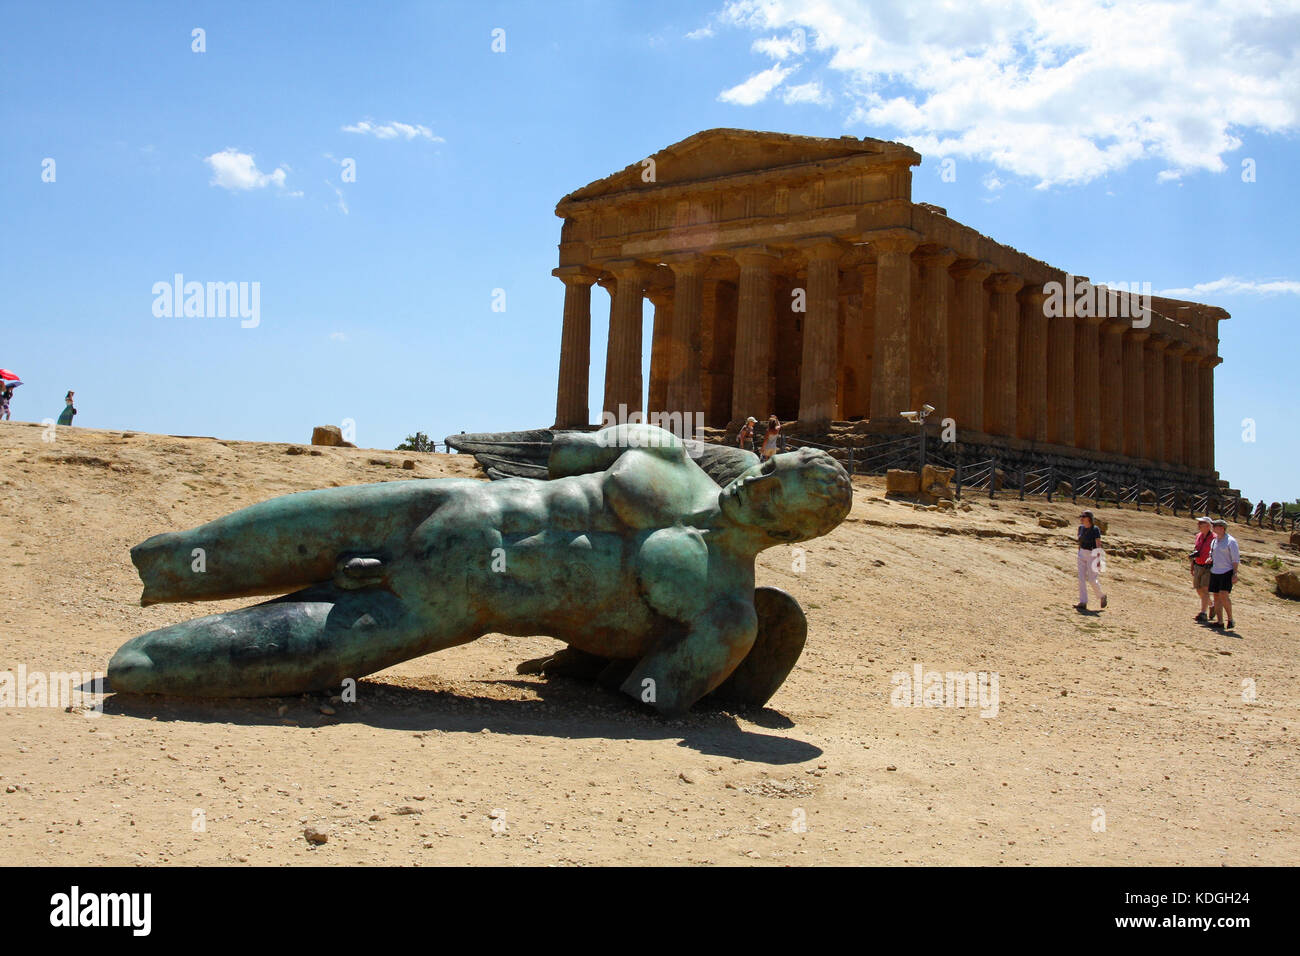 Agrigento, Sicily. Fallen angel statue in the foreground Stock Photo